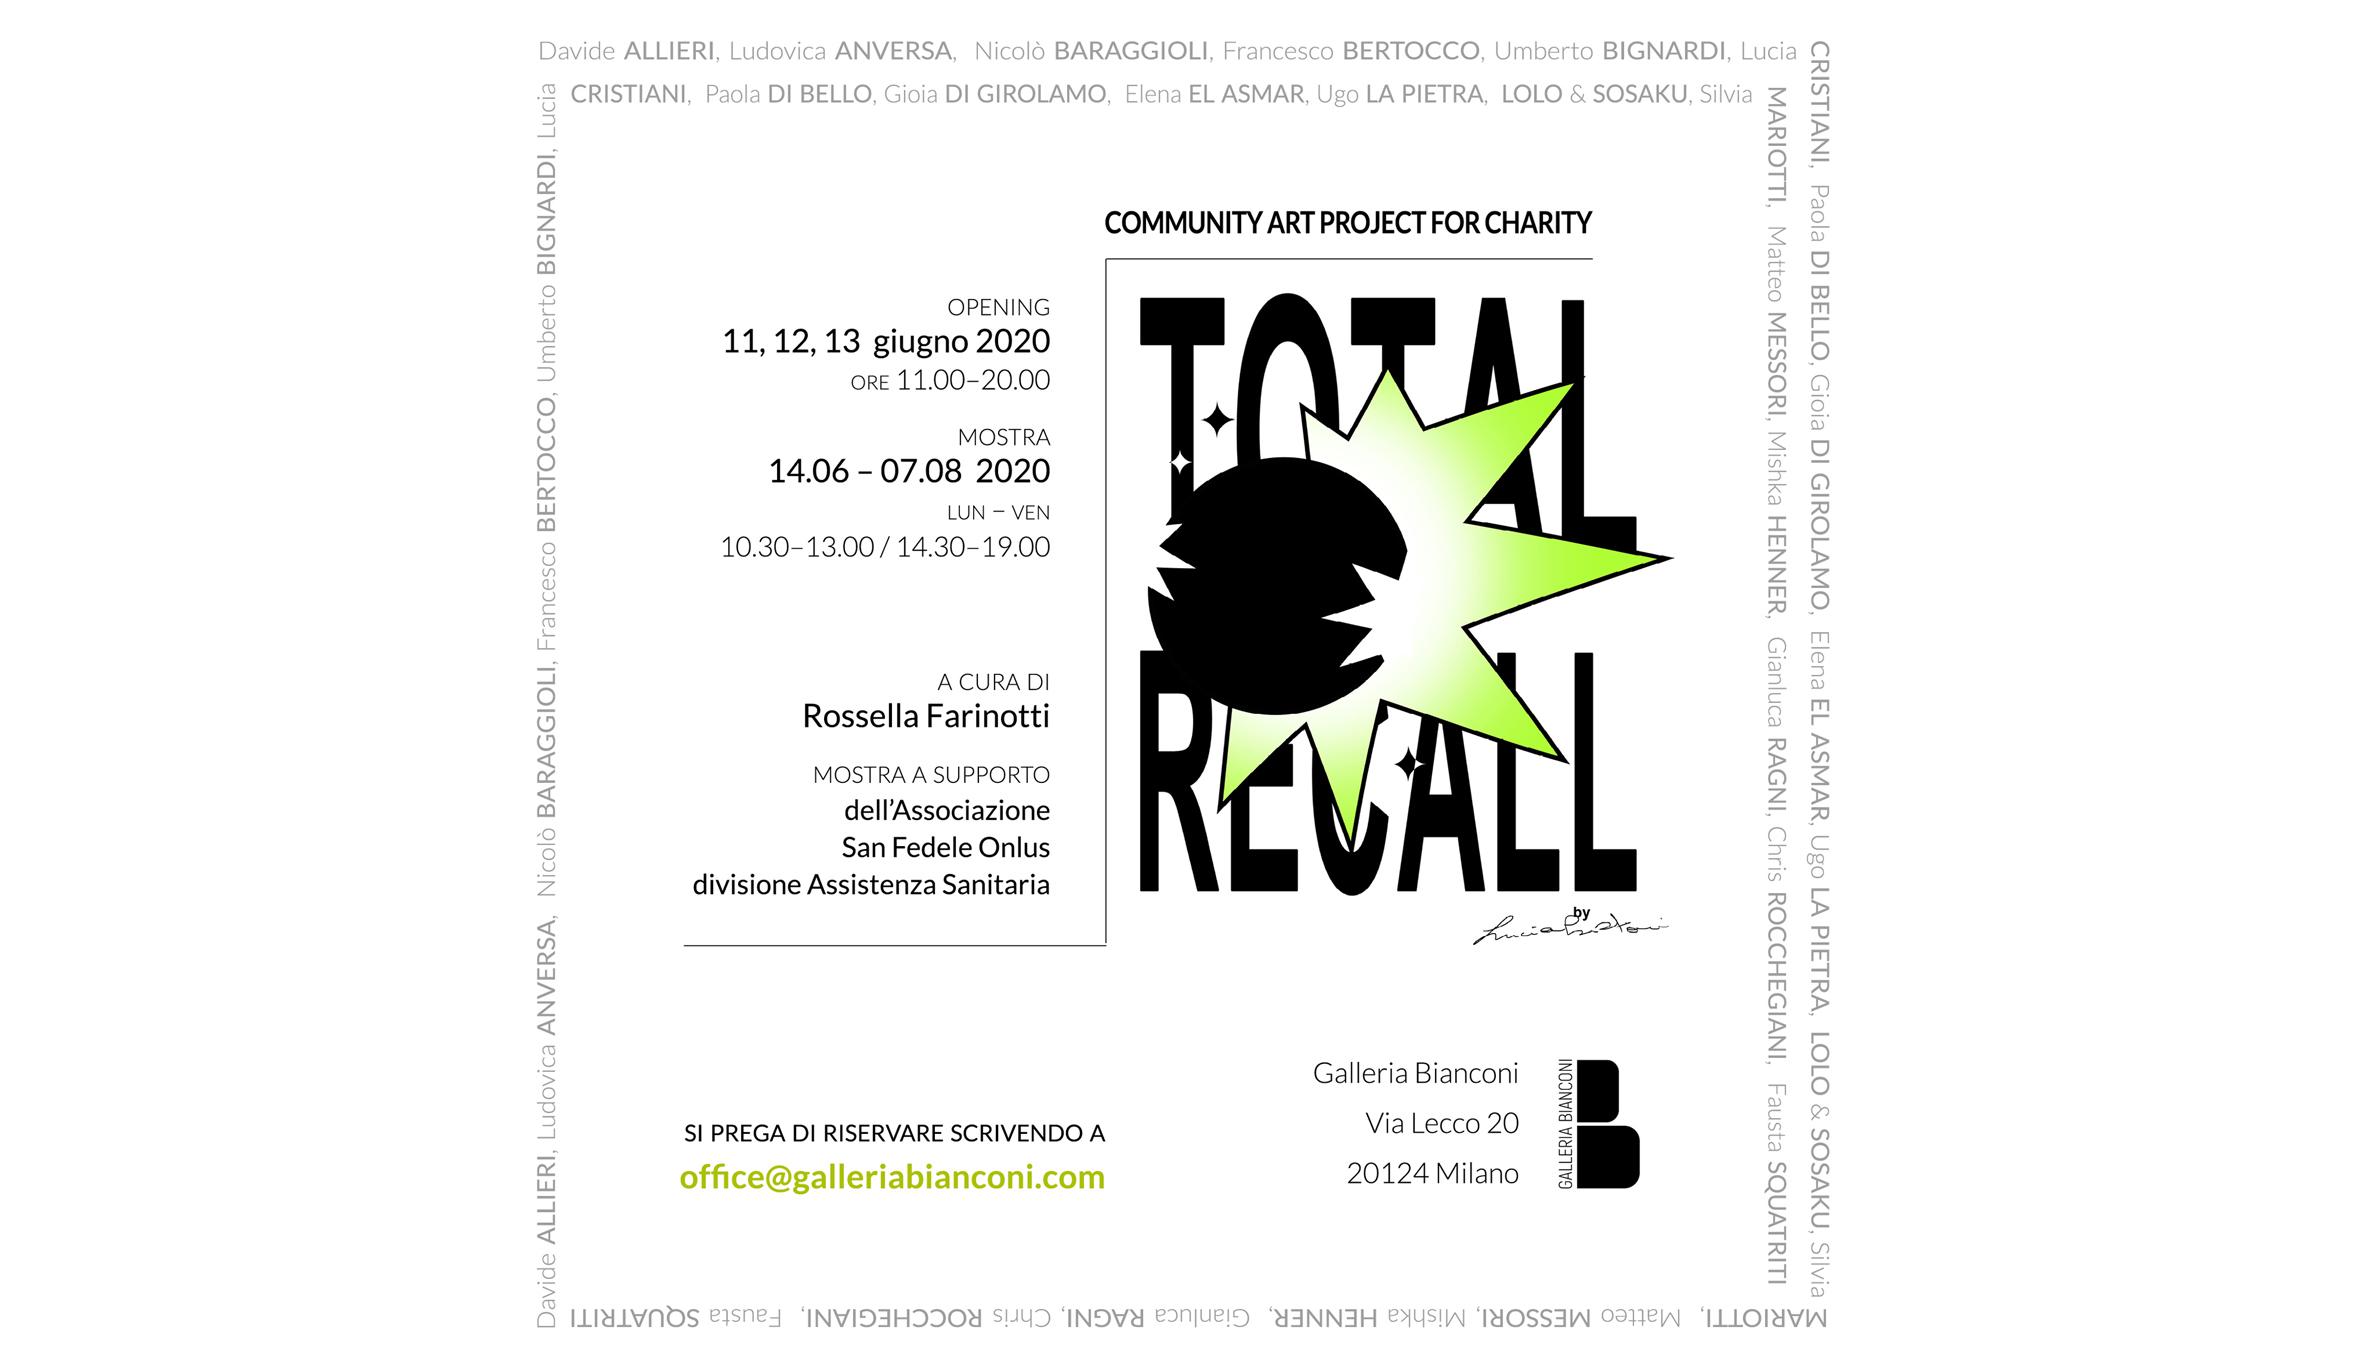 TOTAL RECALL. Community Art Project for Charity